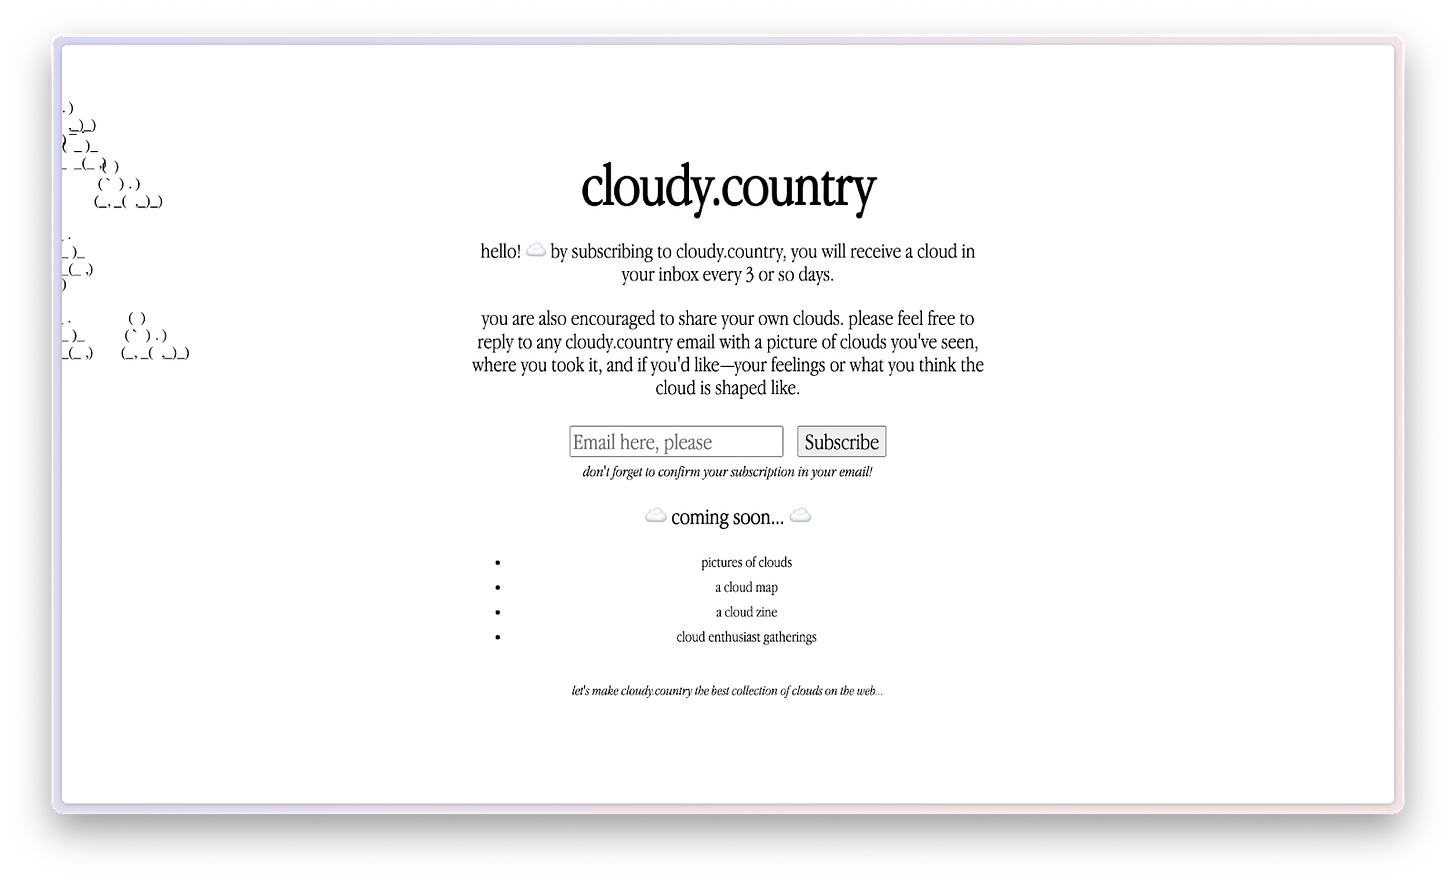 cloudy.country. "hellow! by subscribing to cloudy country, you will receive a cloud in your inbox every 3 or so days" with ascii clouds in the background and an email subscribe box